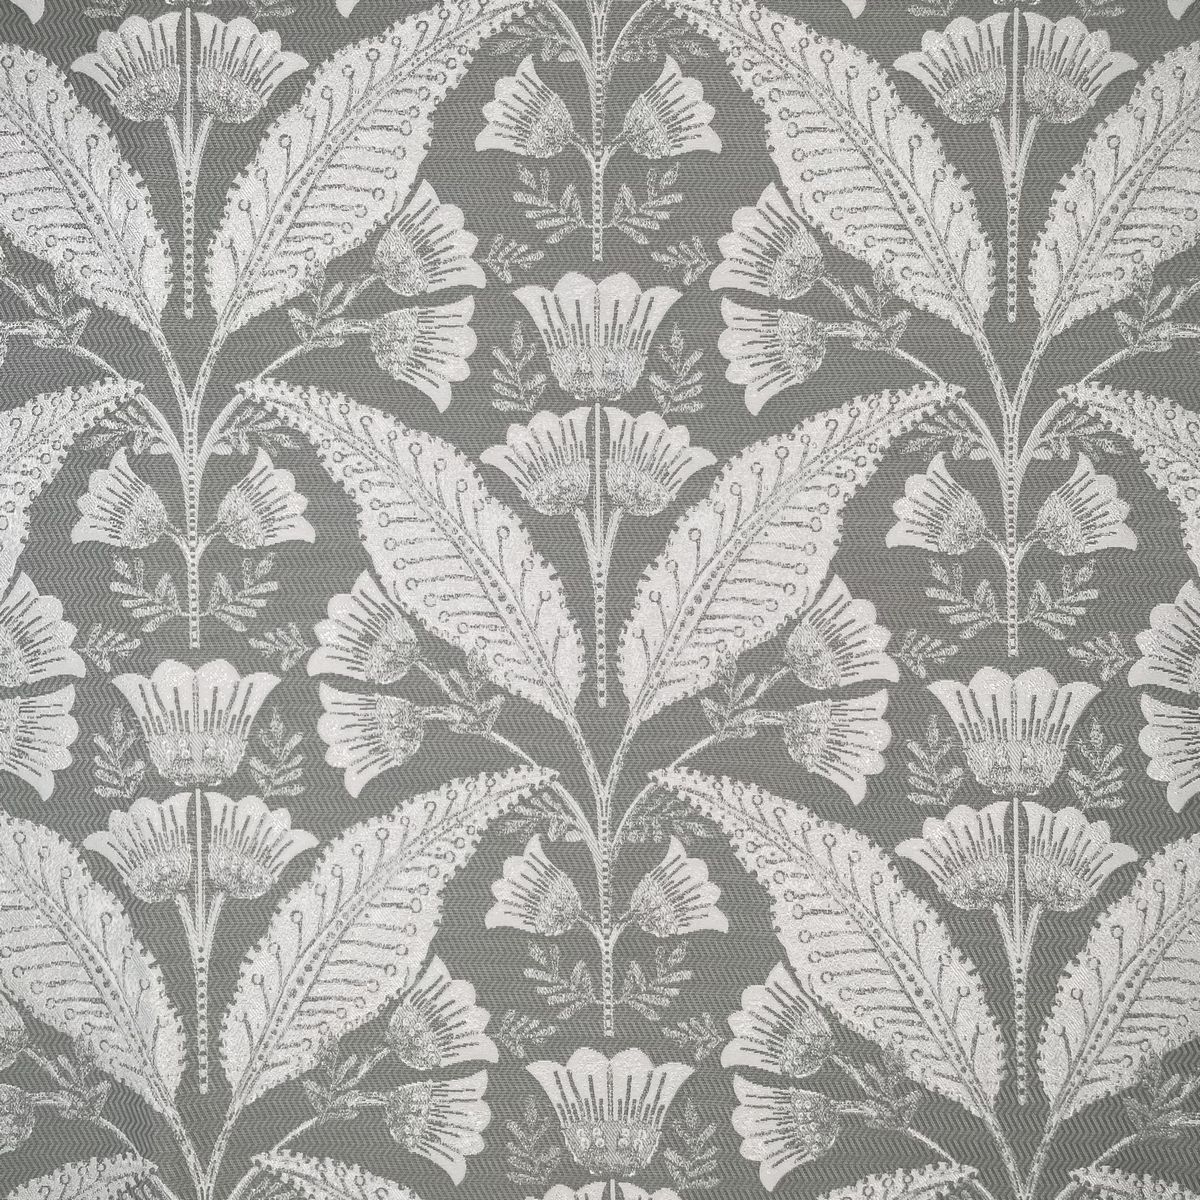 Burghley Willow Fabric by Chatham Glyn